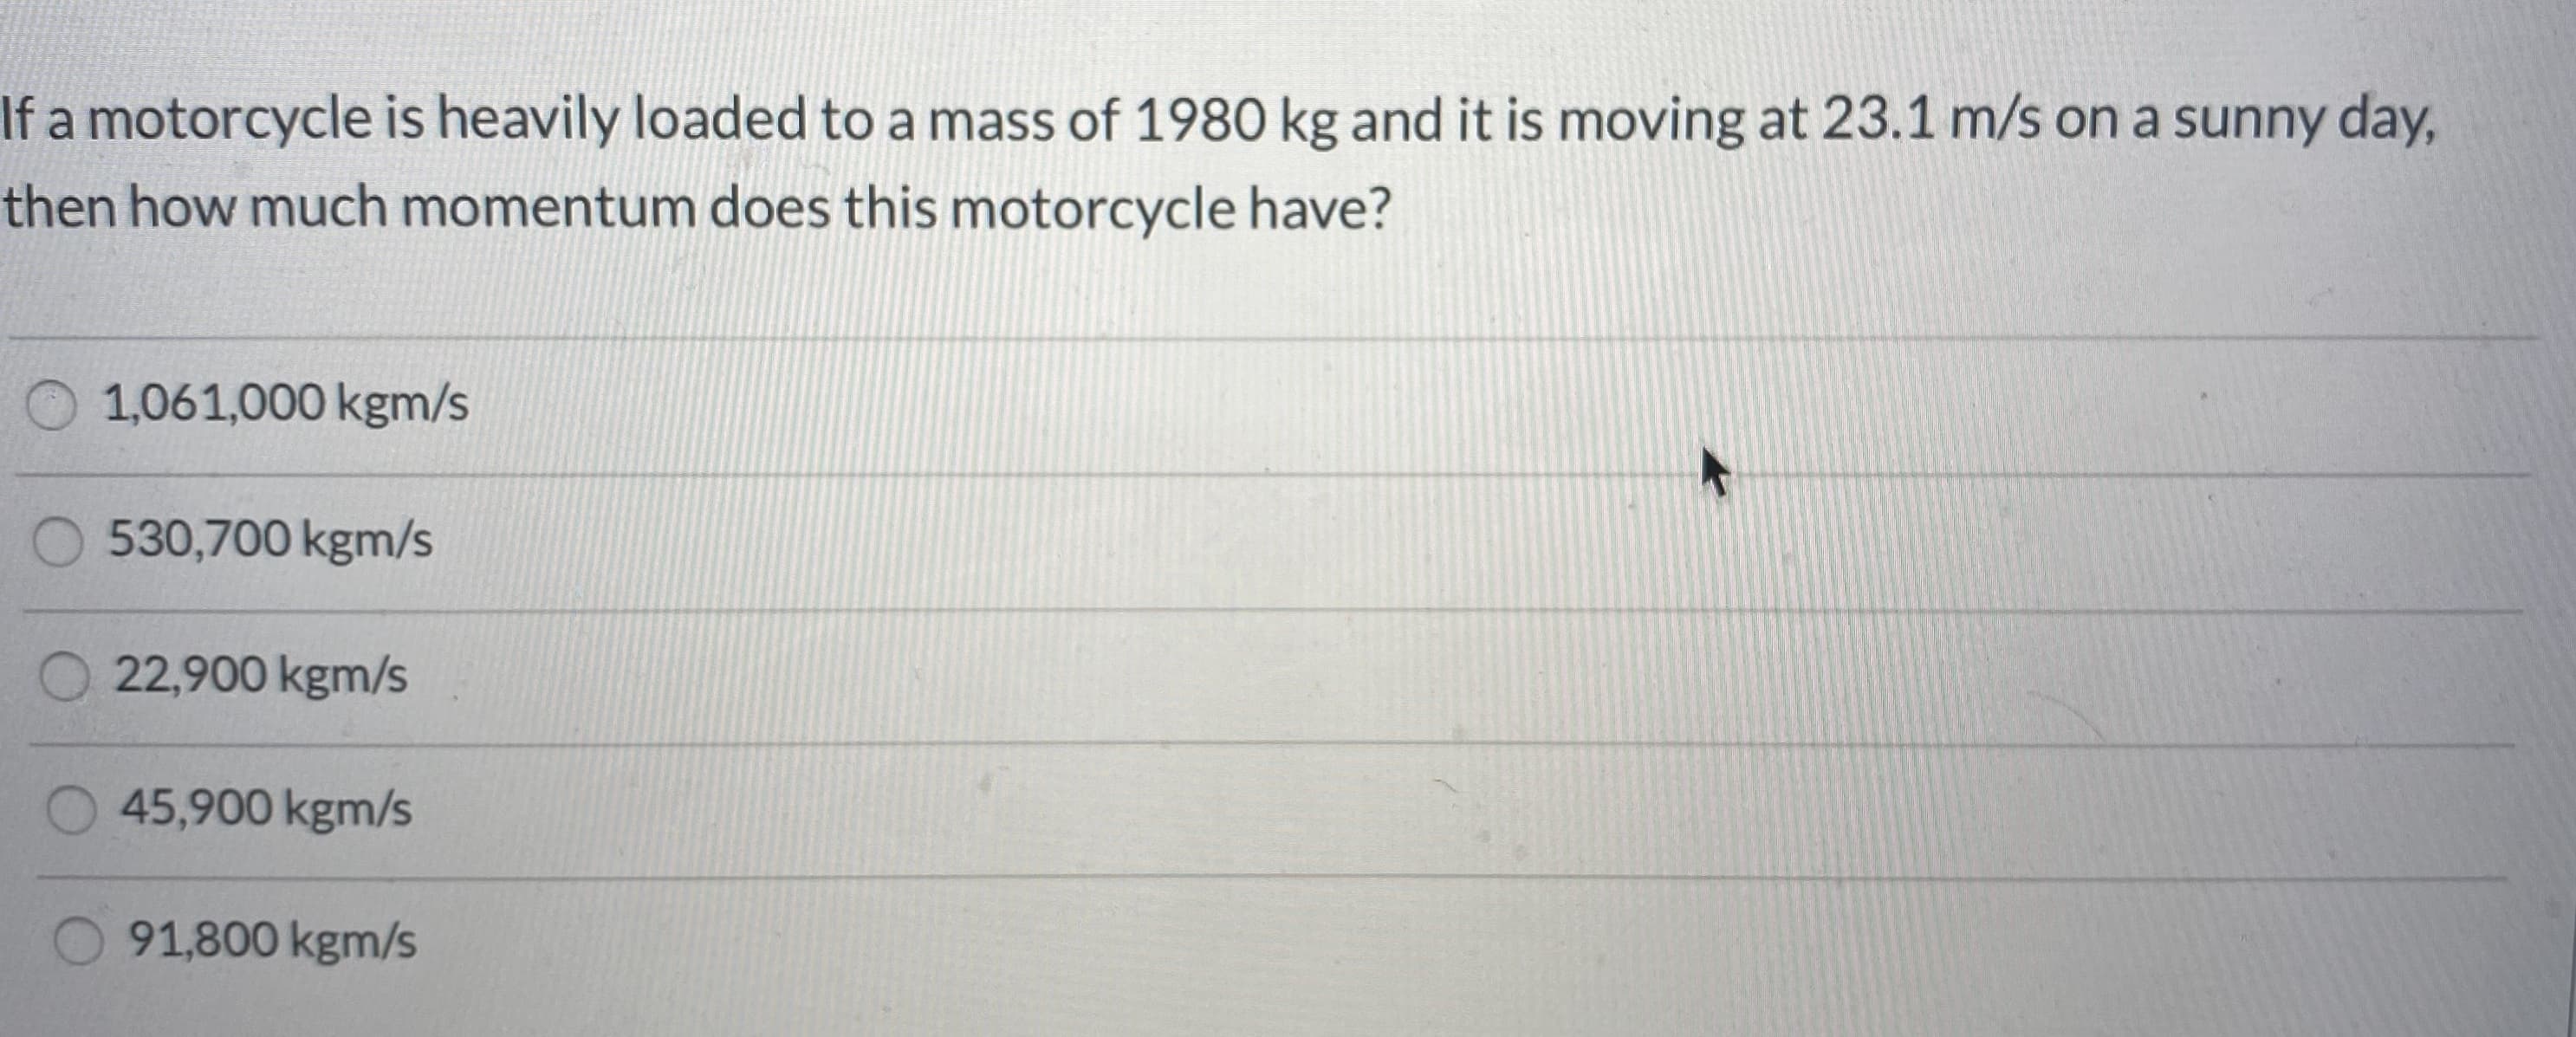 If a motorcycle is heavily loaded to a mass of 1980 kg and it is moving at 23.1 m/s on a sunny day,
then how much momentum does this motorcycle have?
